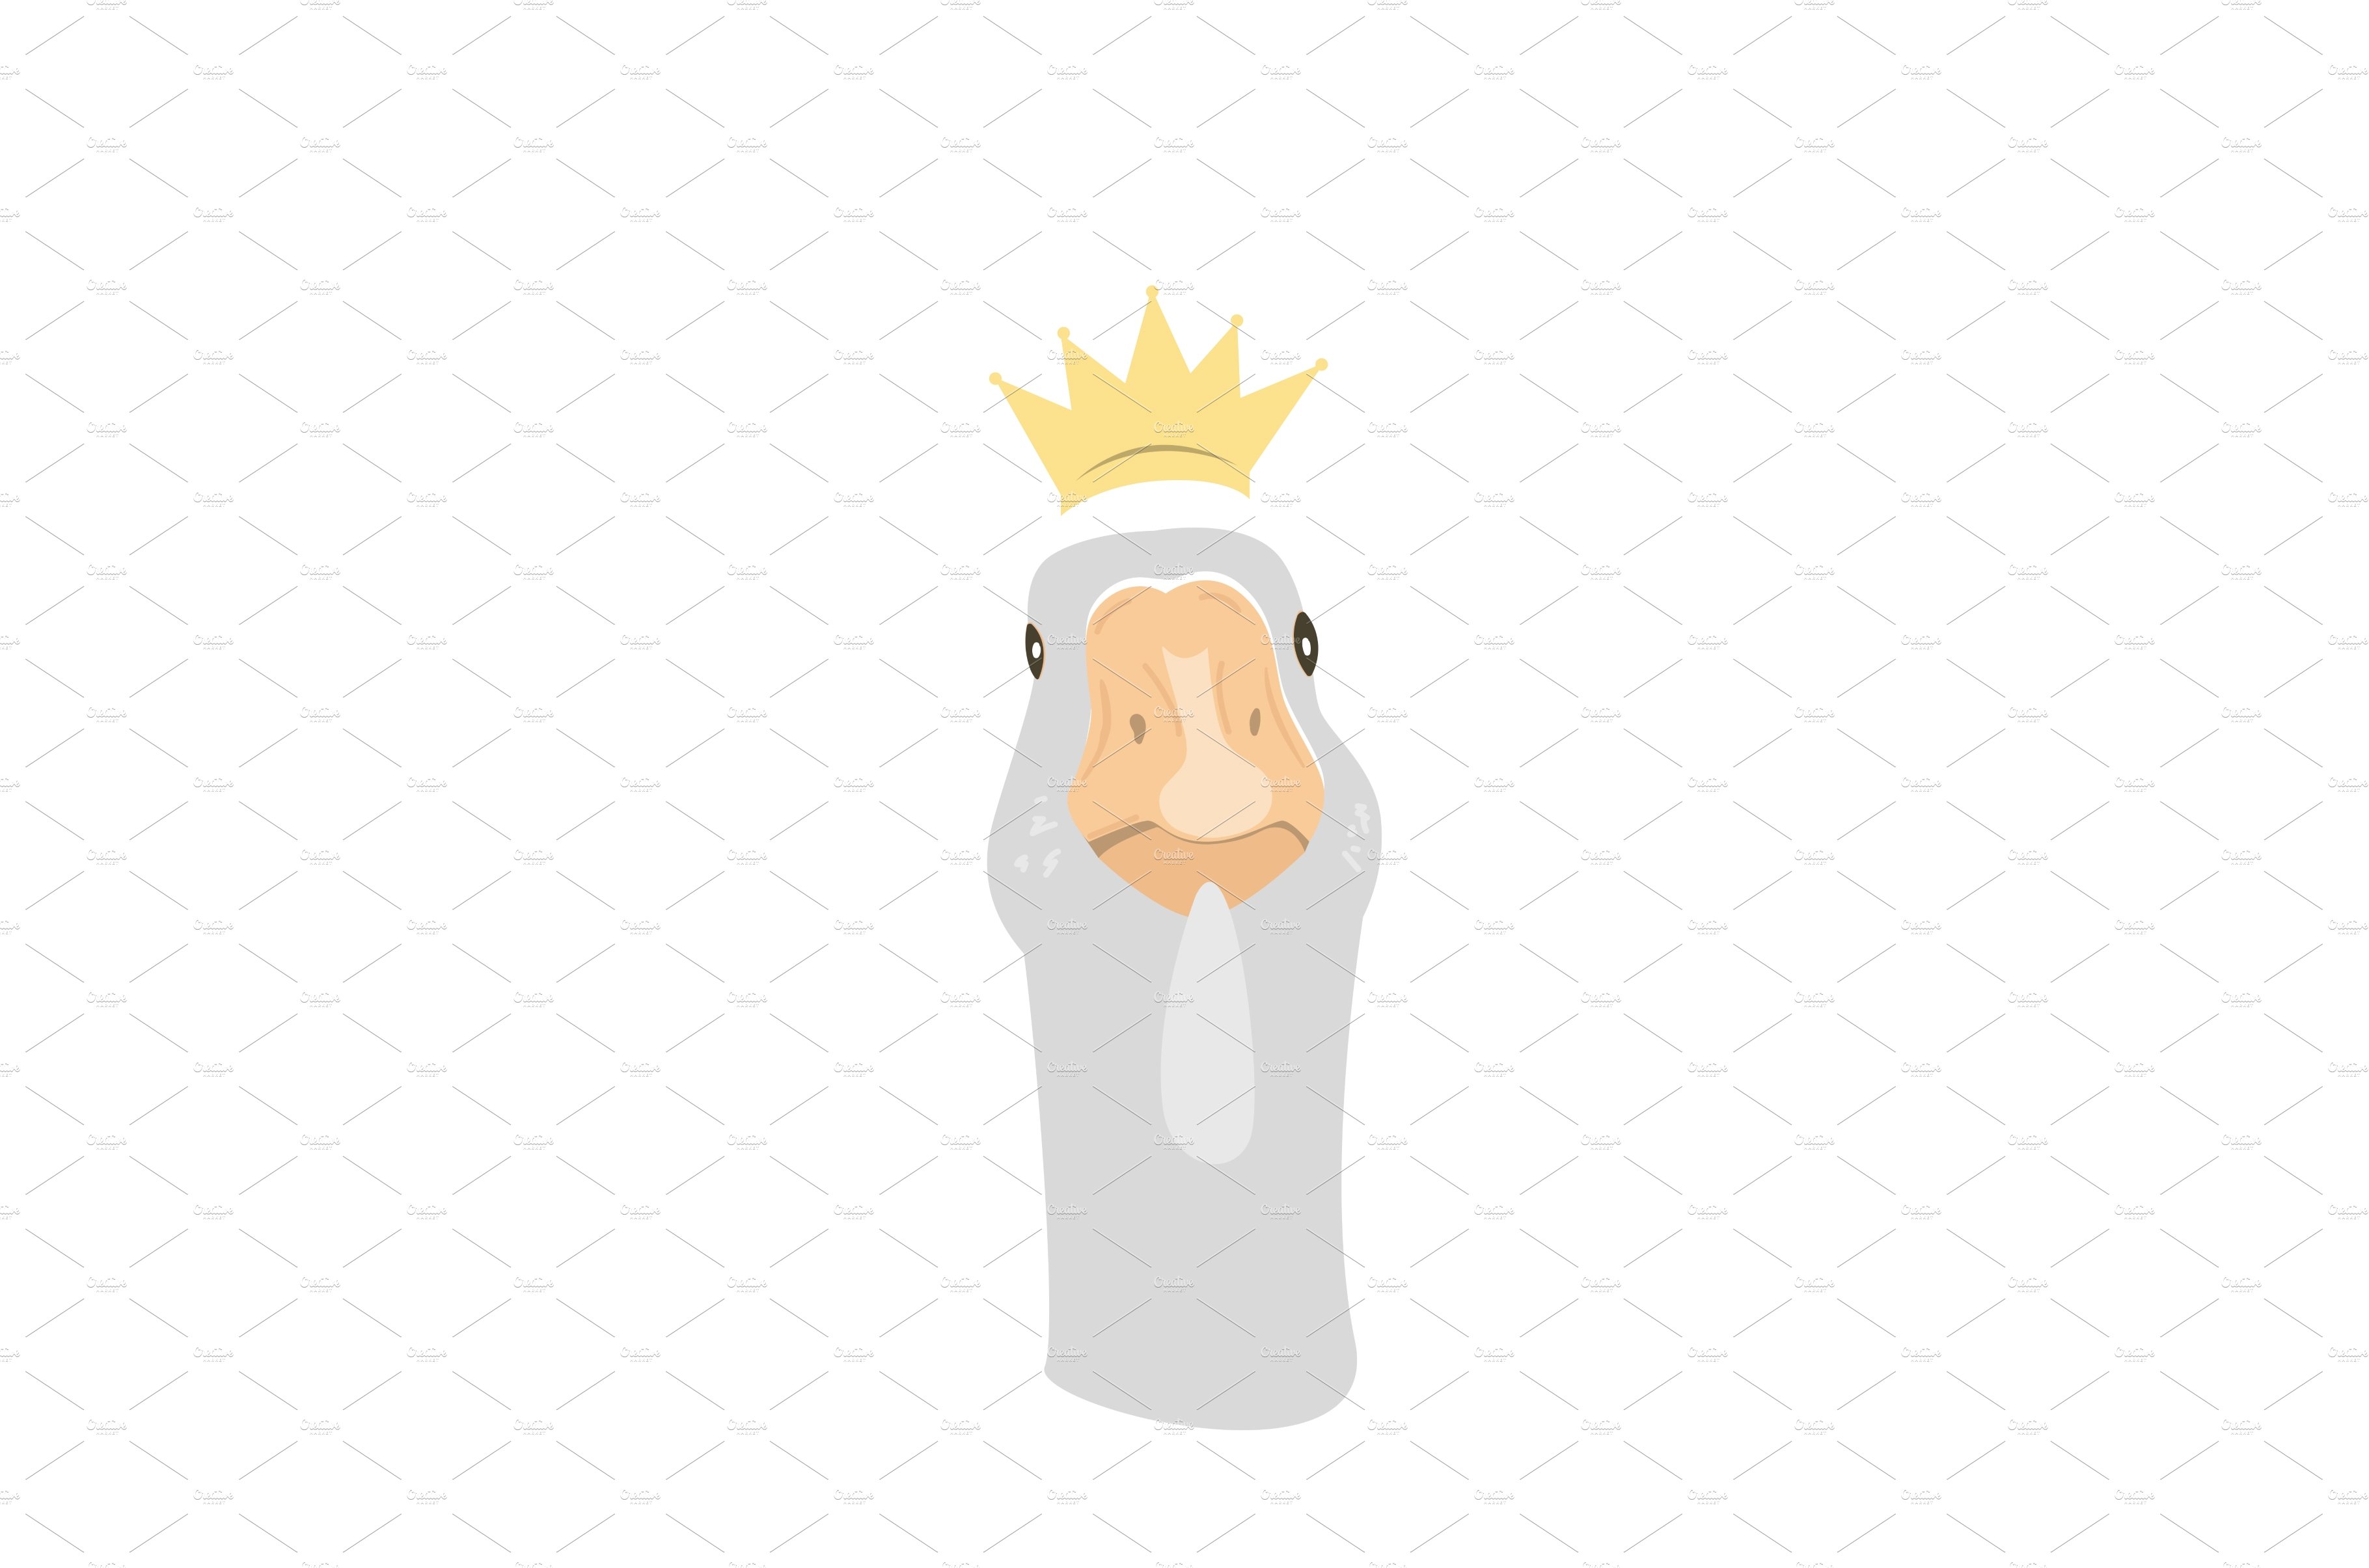 King goose in crown isolated cover image.